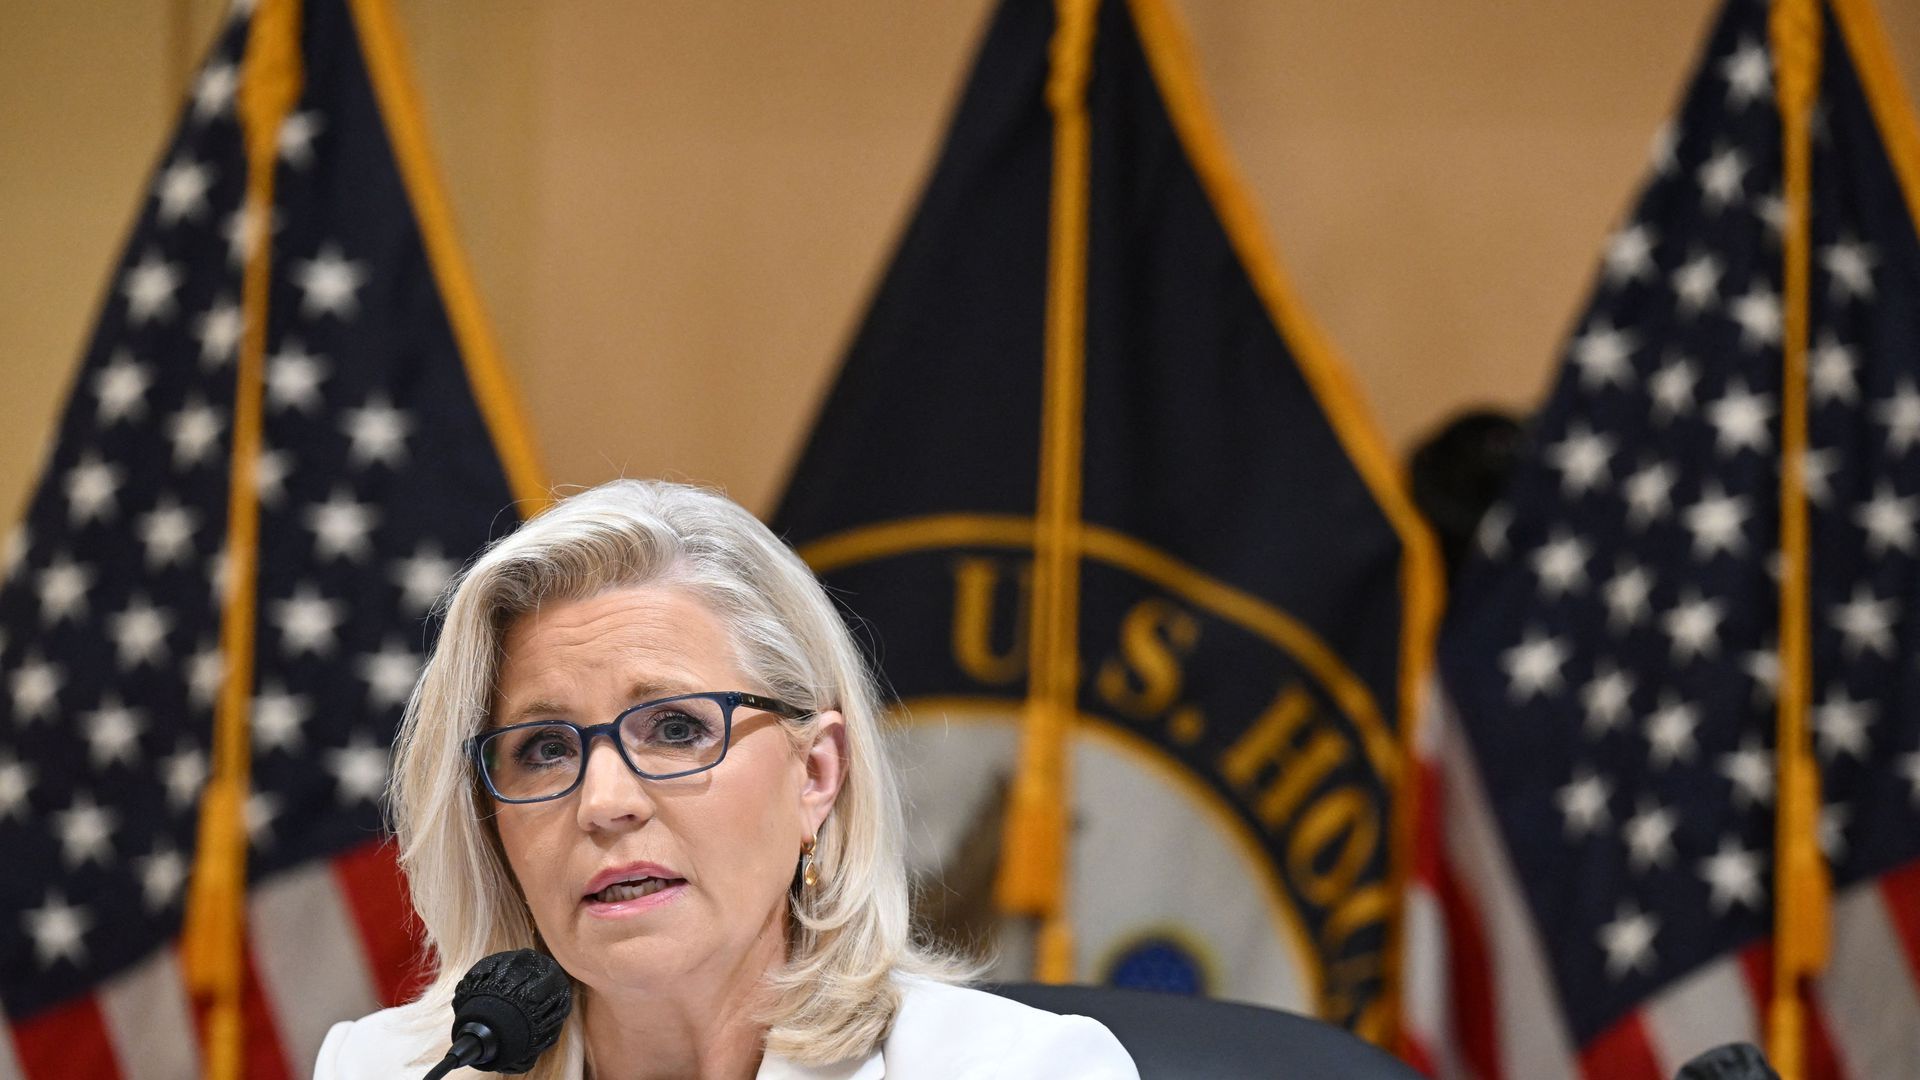 Rep. Liz Cheney wearing white, in front of a microphone